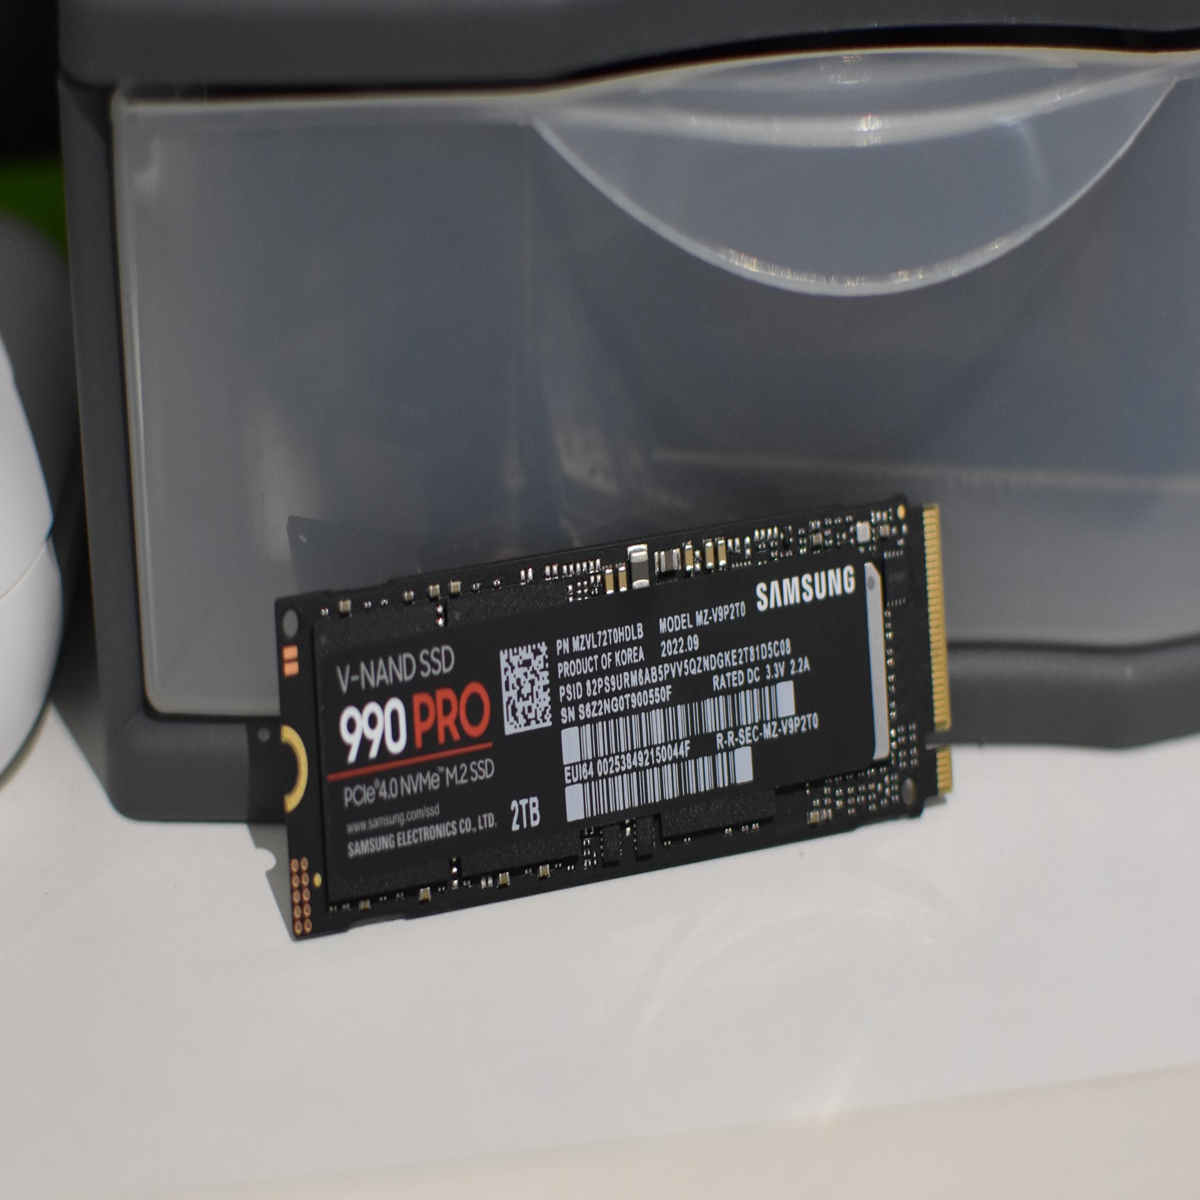 New Samsung 990 EVO NVMe SSD is available and already on sale